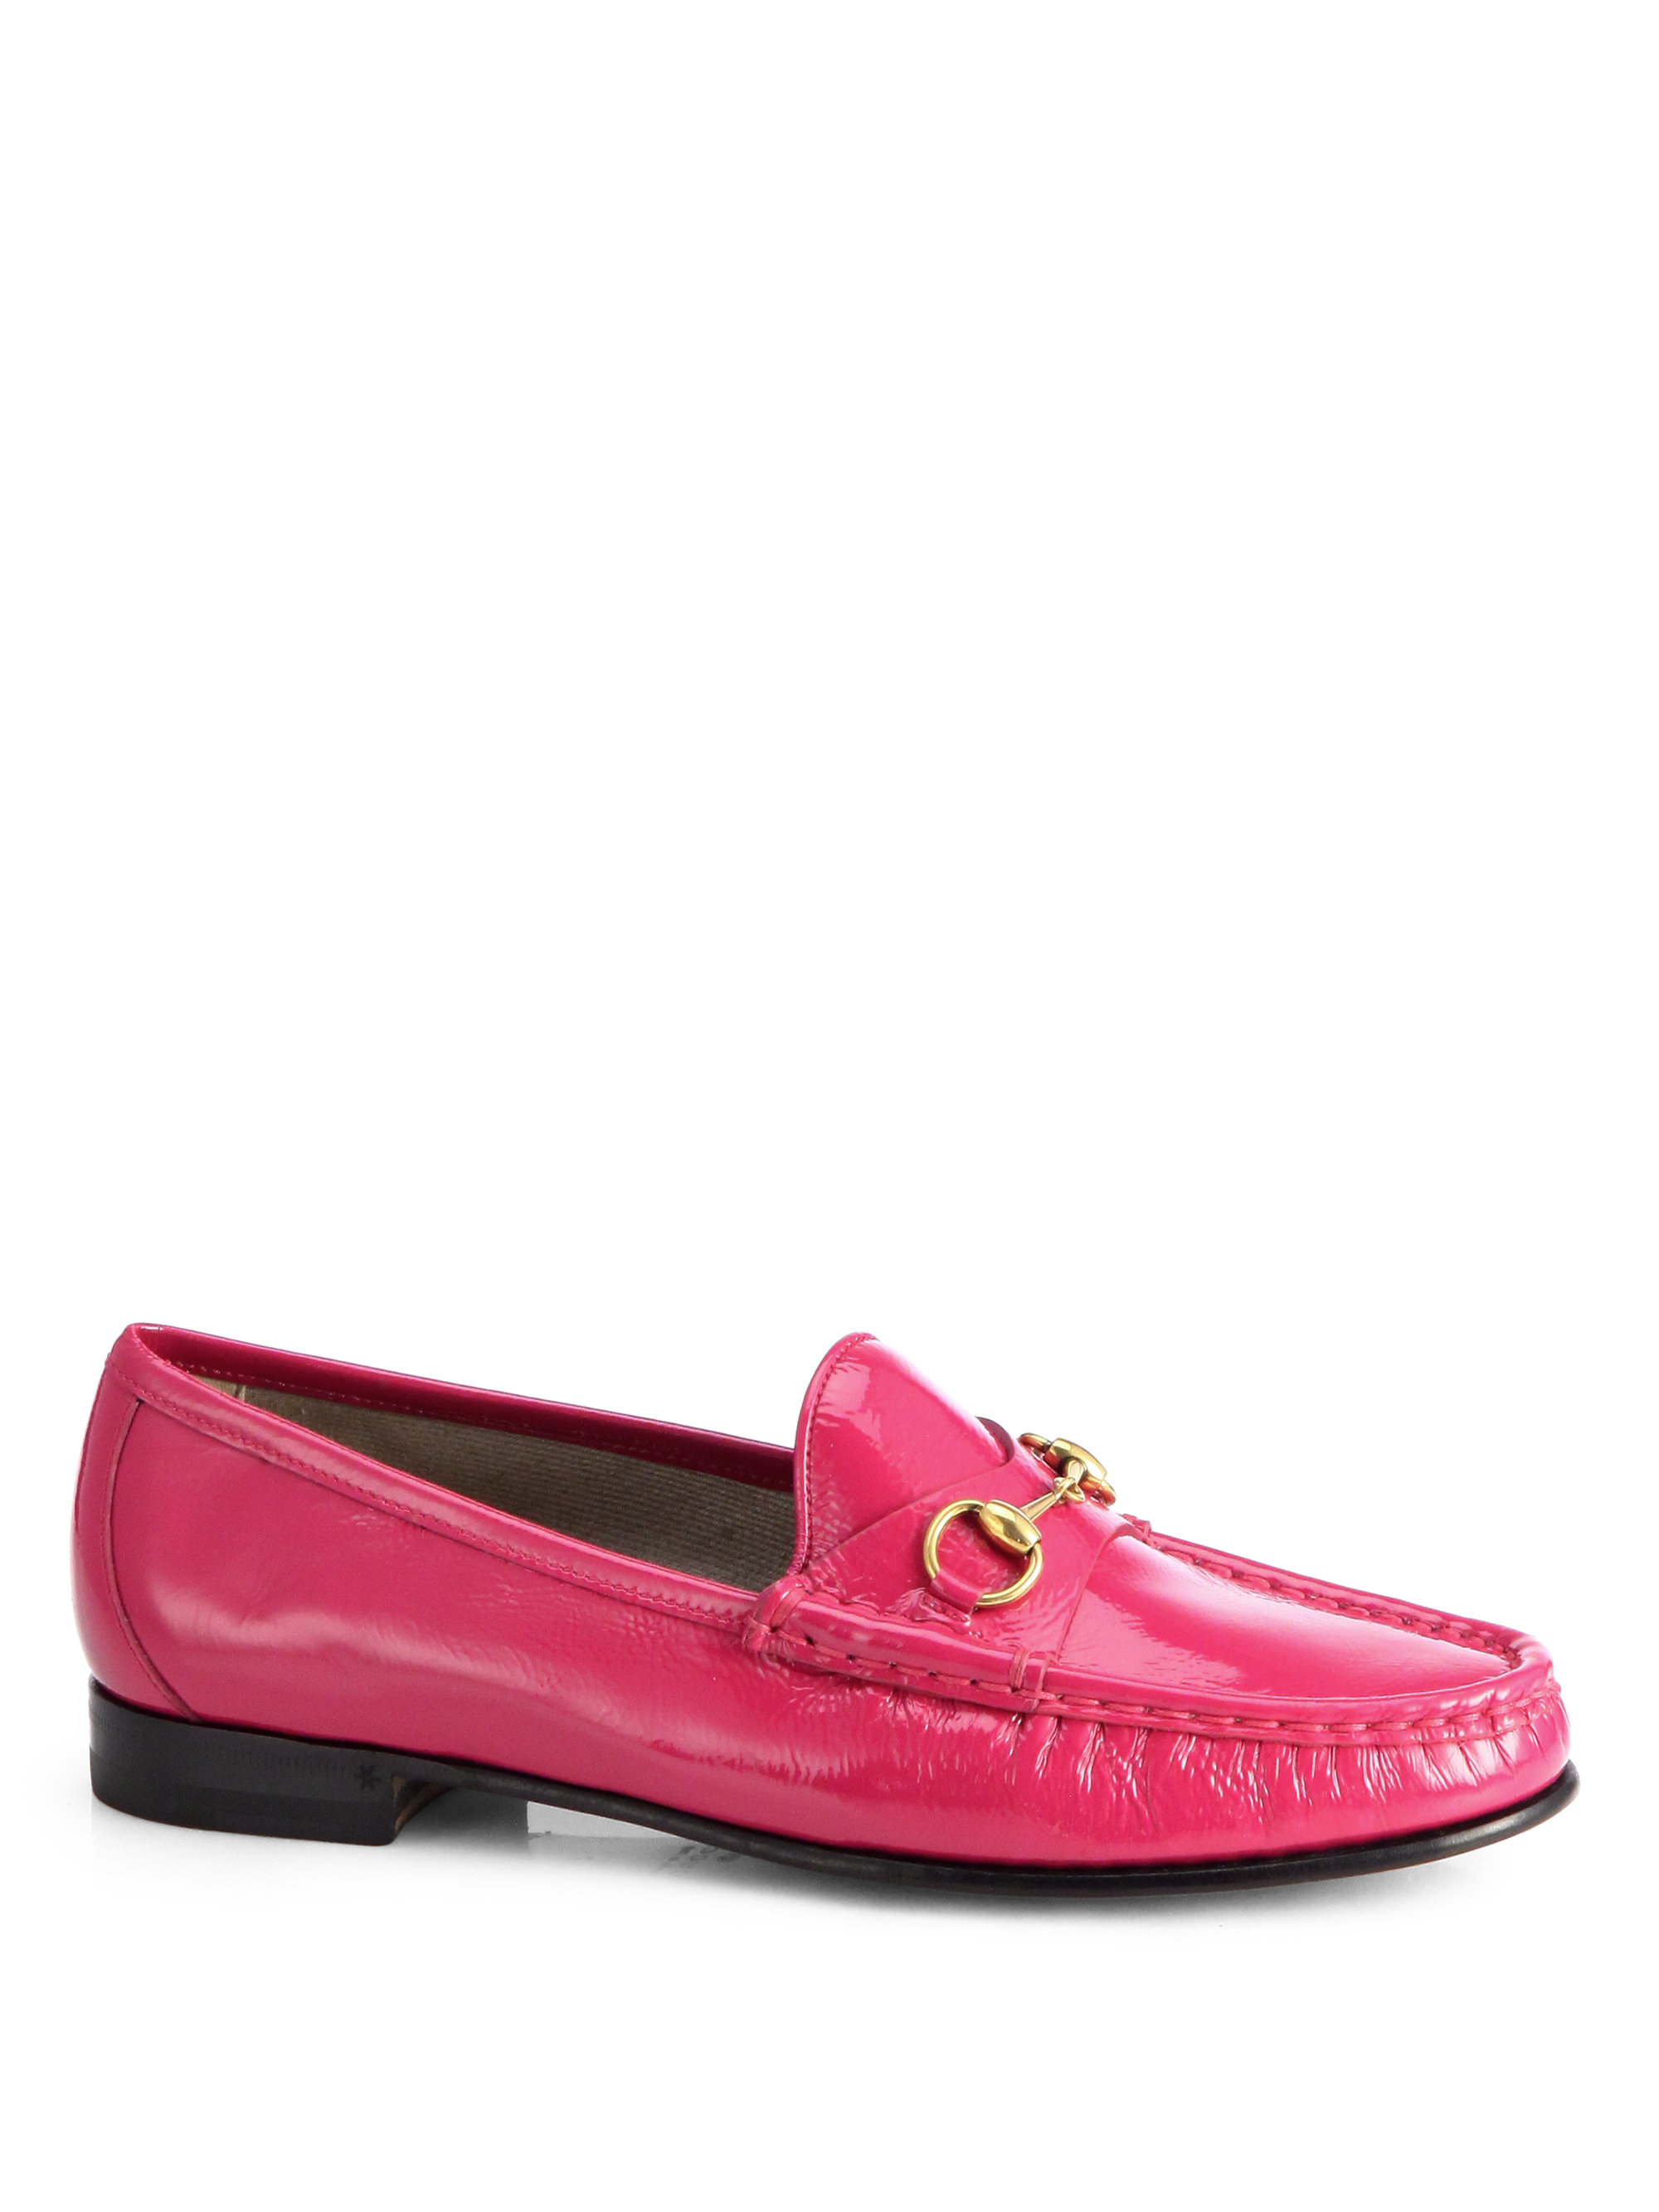 Gucci Patent Leather Horsebit Loafers in Pink | Lyst